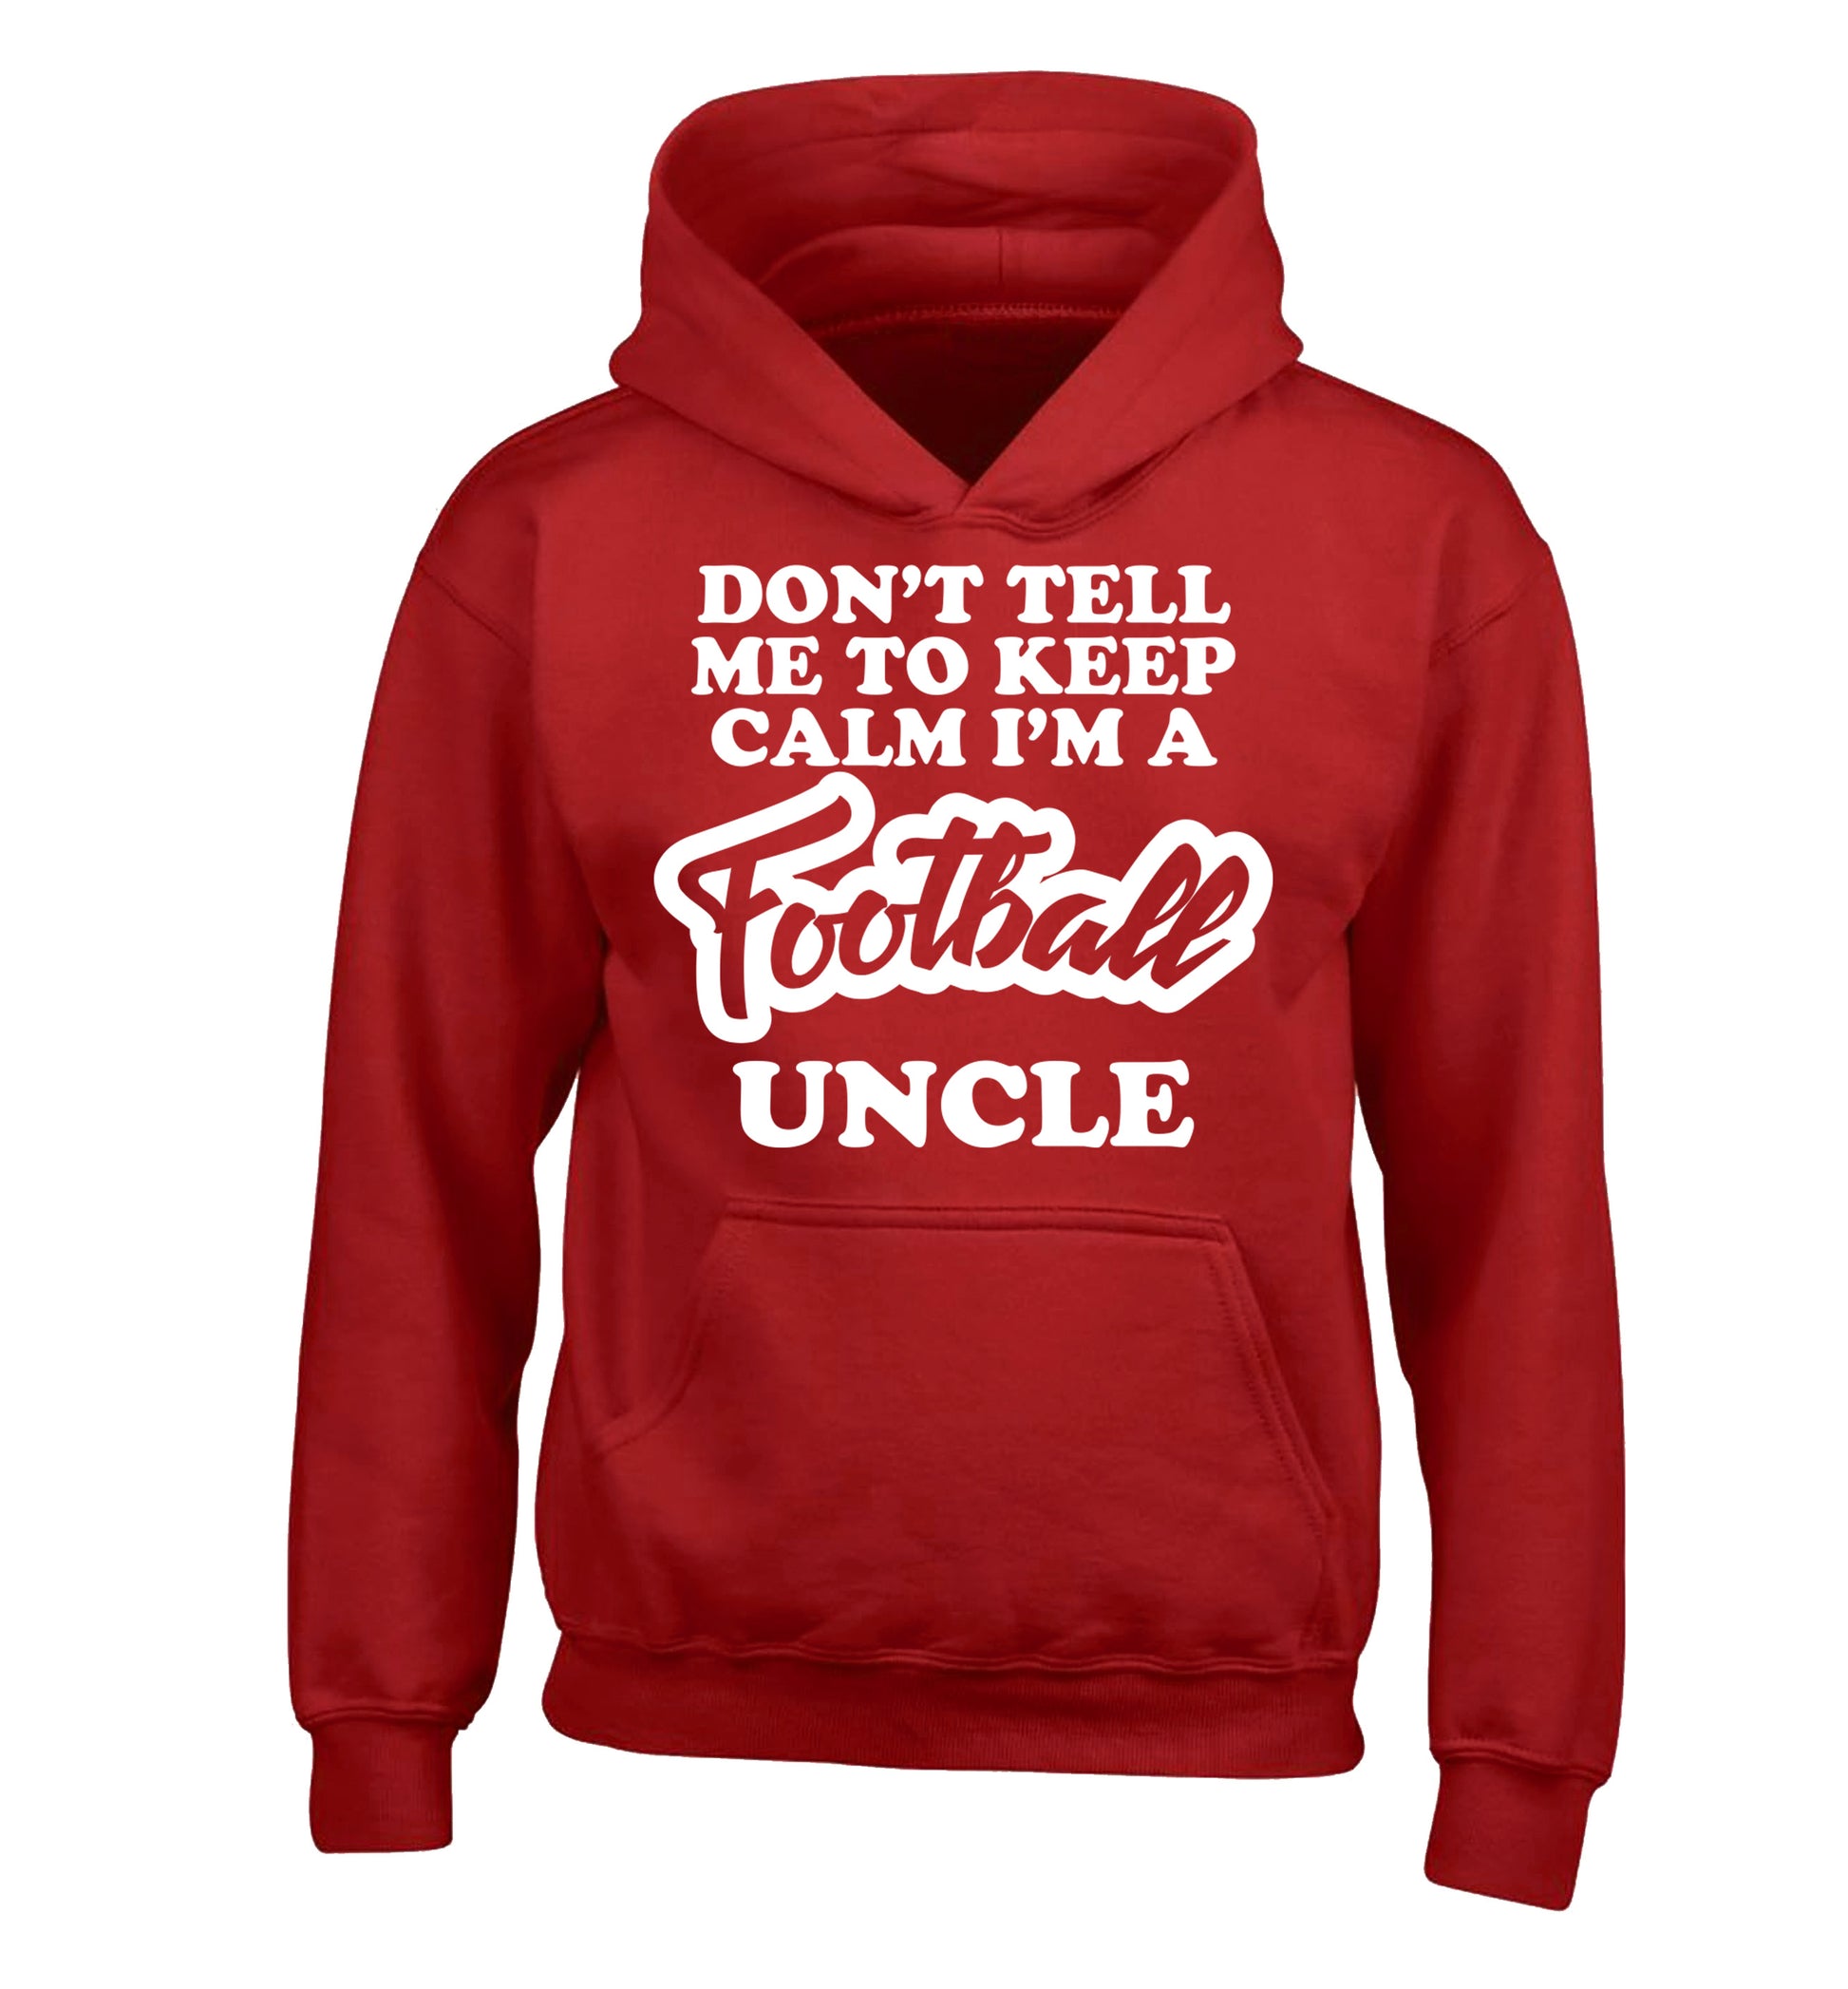 Don't tell me to keep calm I'm a football uncle children's red hoodie 12-14 Years